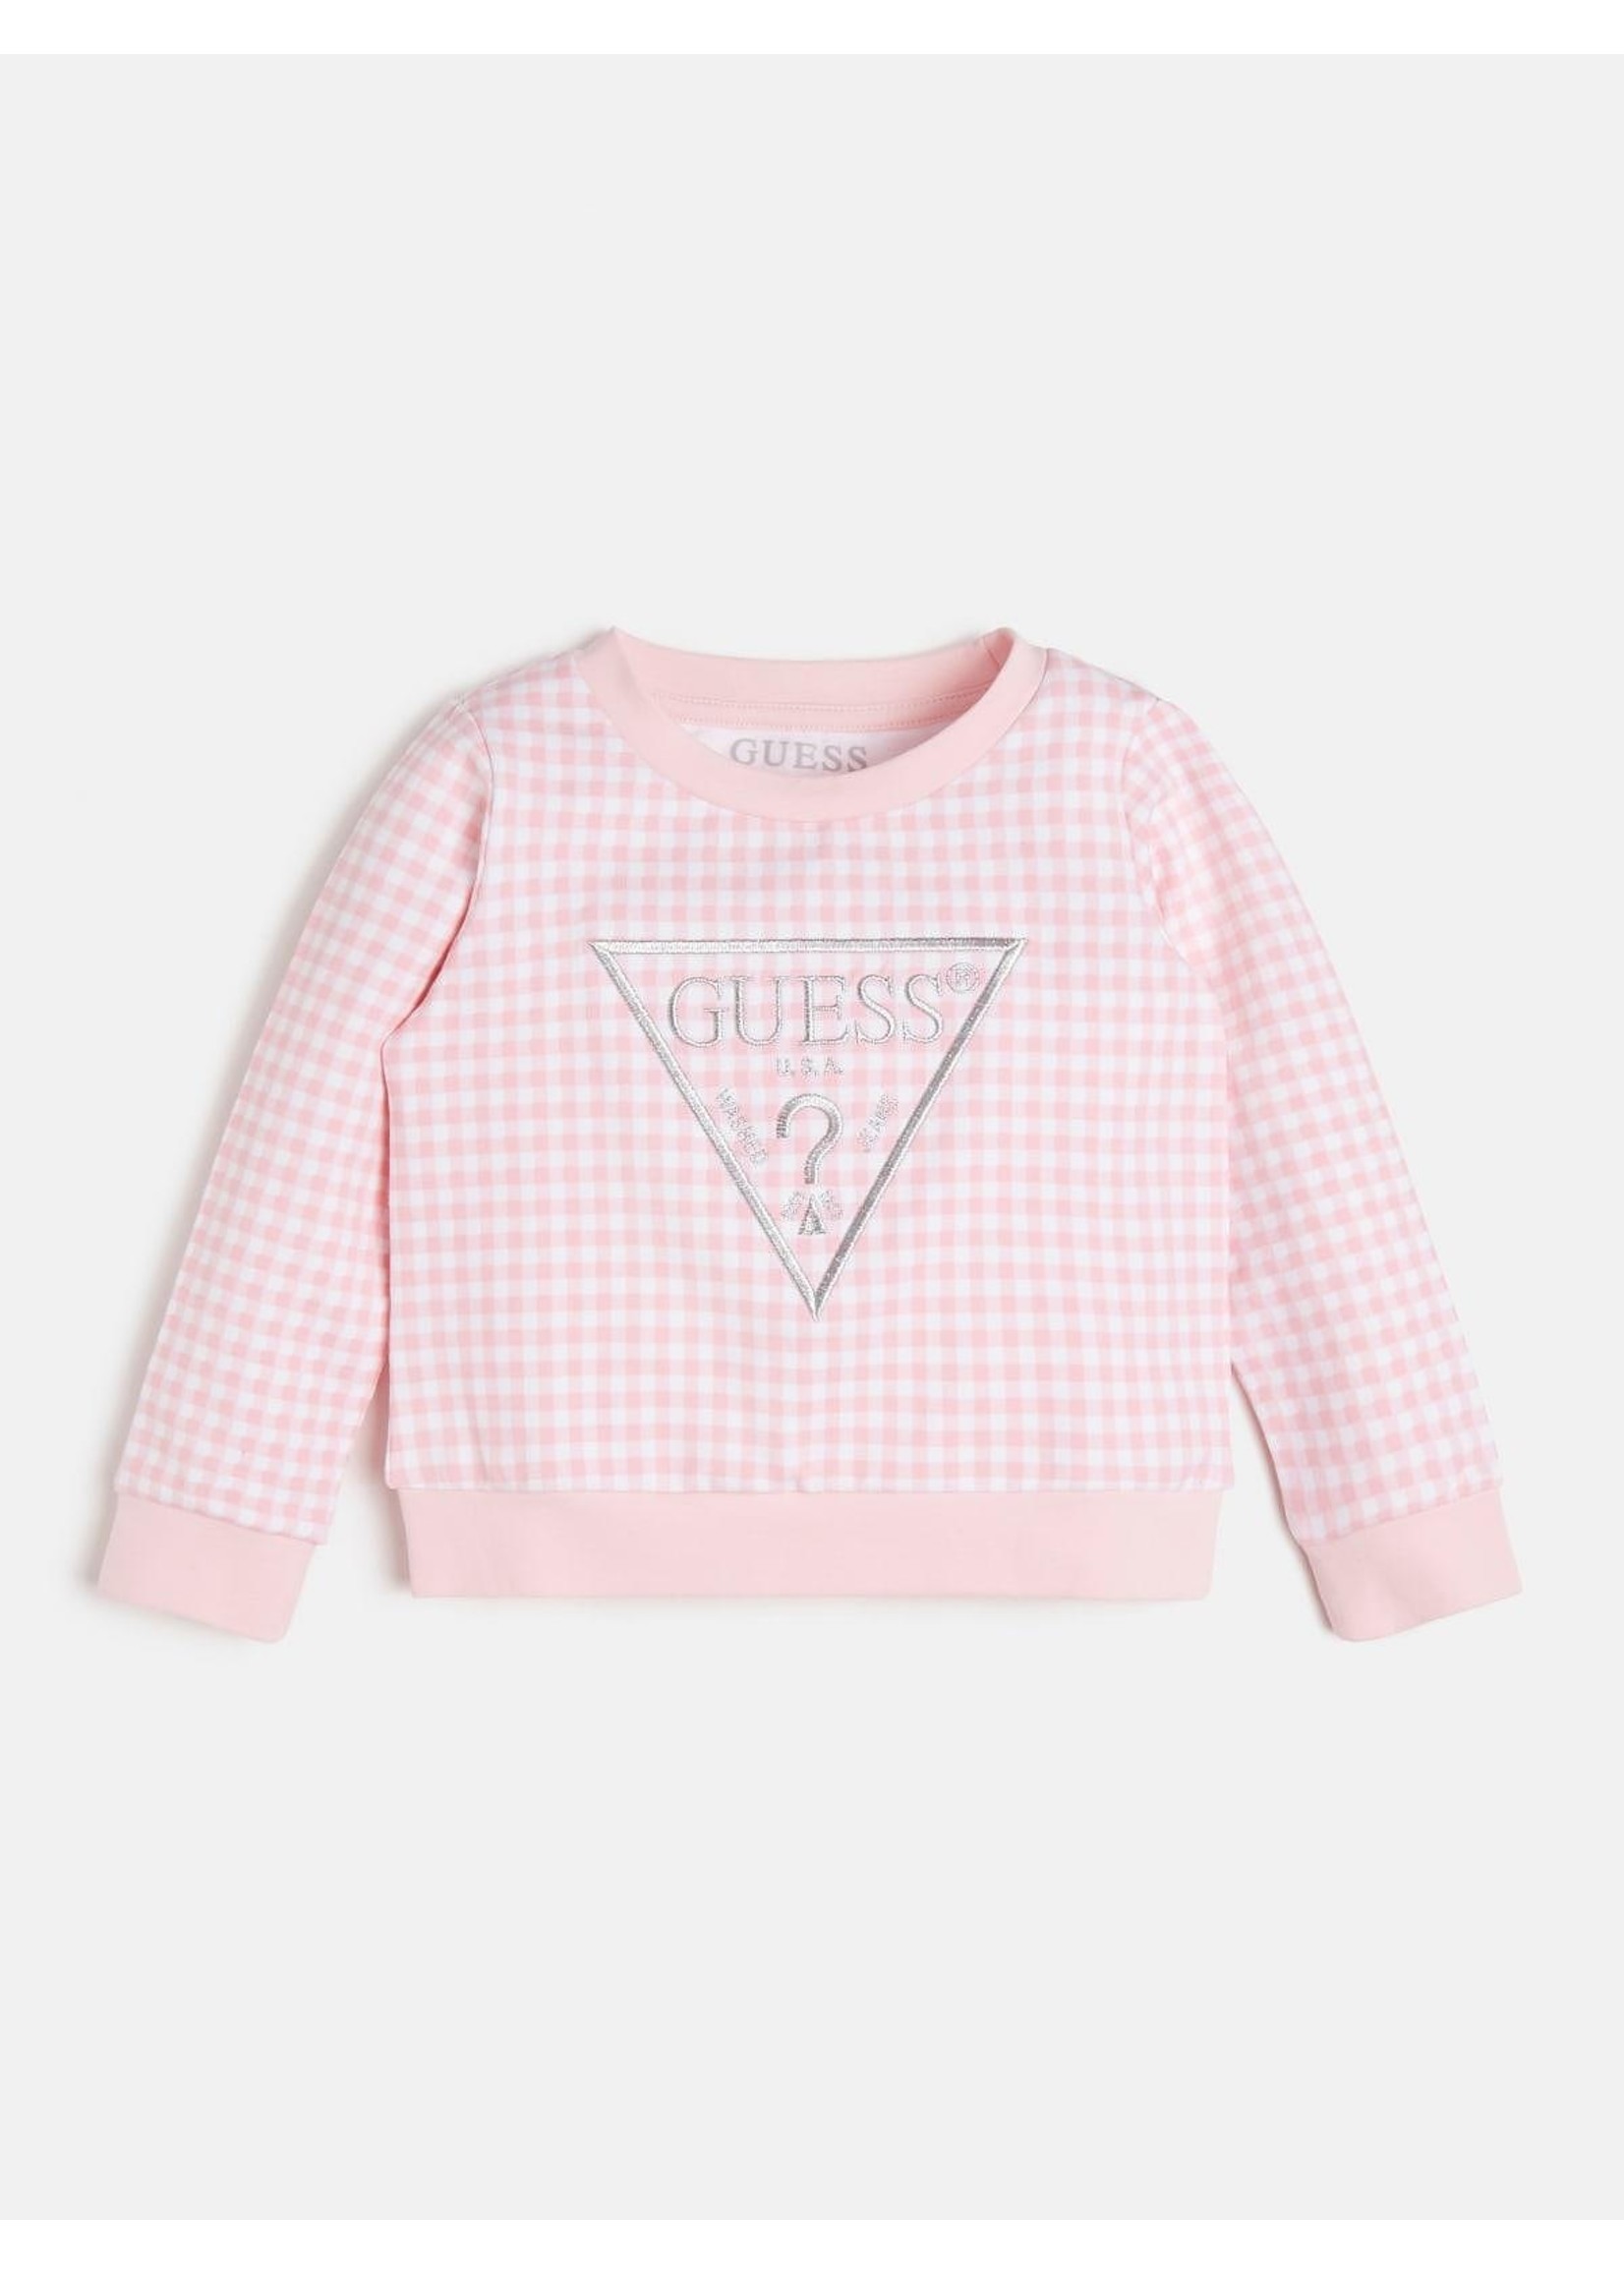 Guess LS ACTIVE TOP PINK & WHITE VICHY